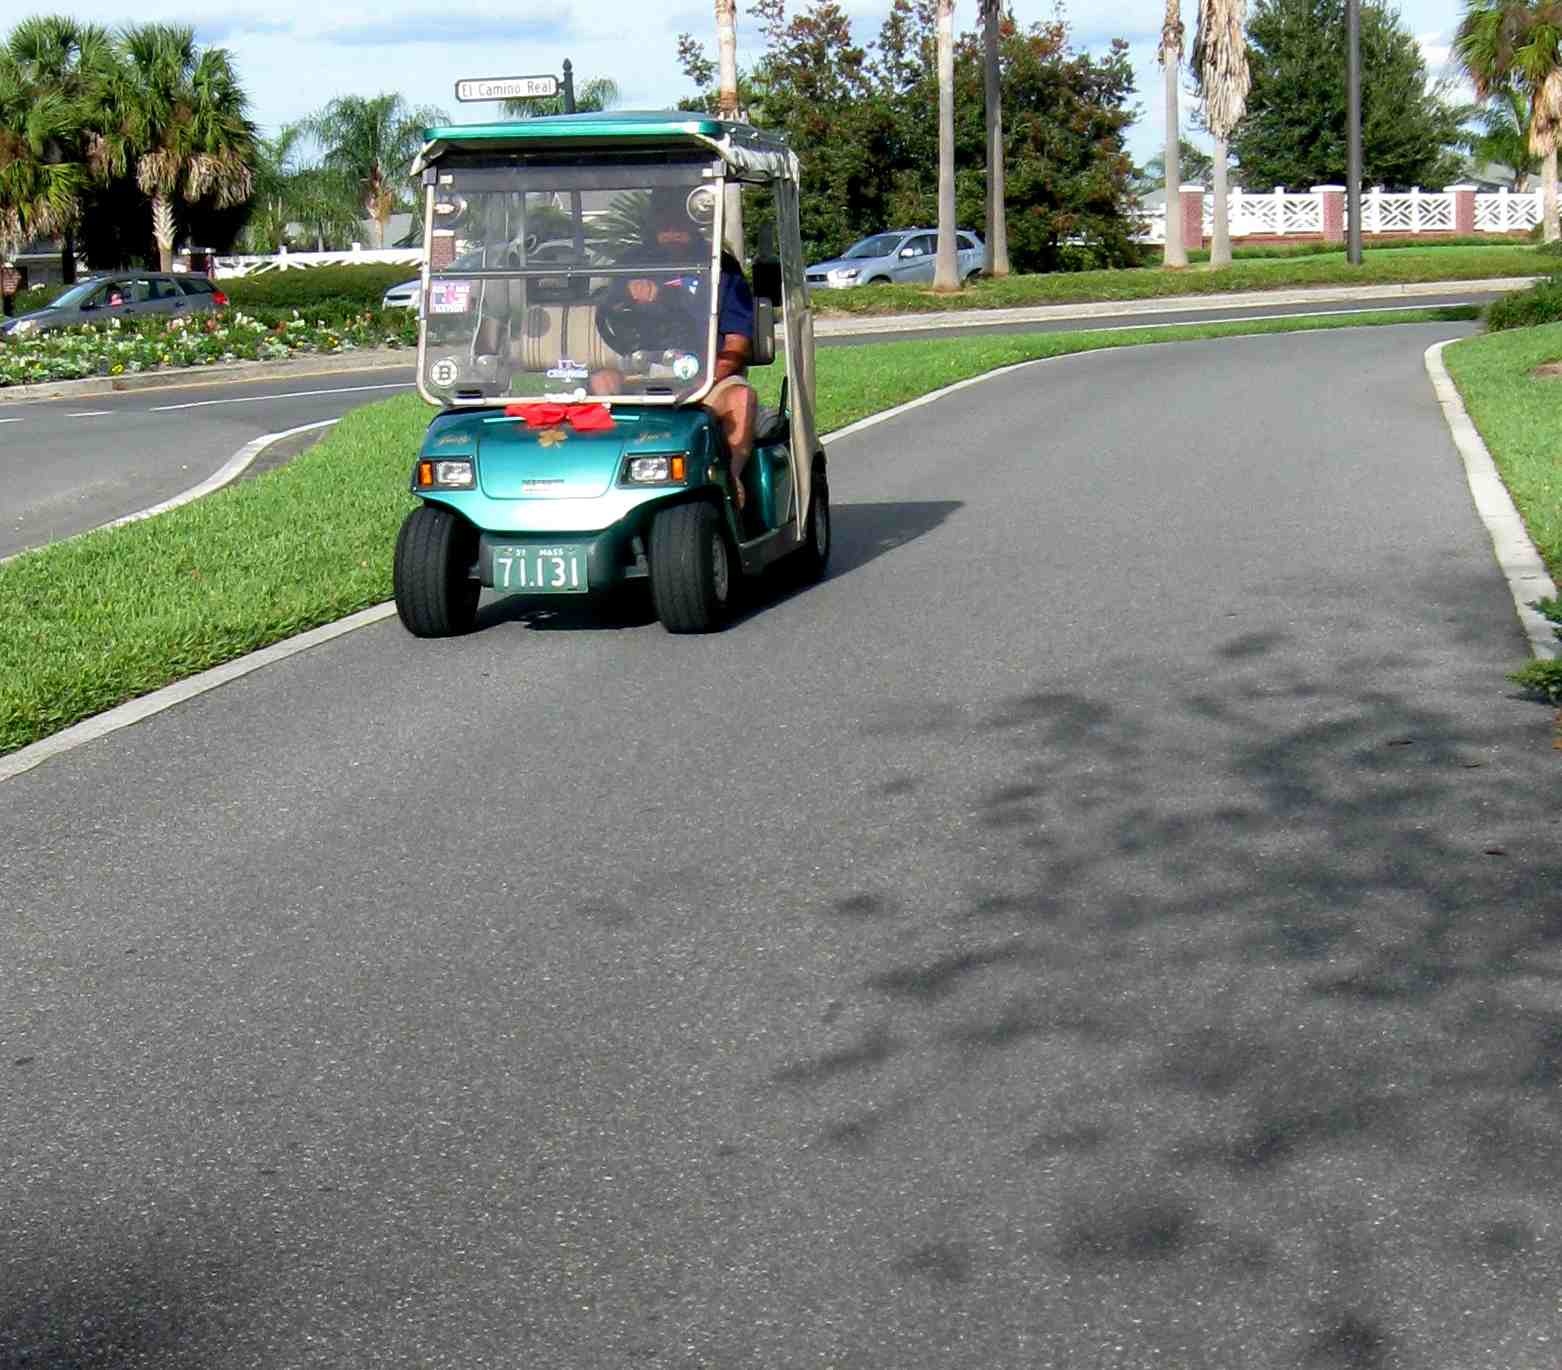 AAC deadlocks 3-3 on issue of striping of golf car paths